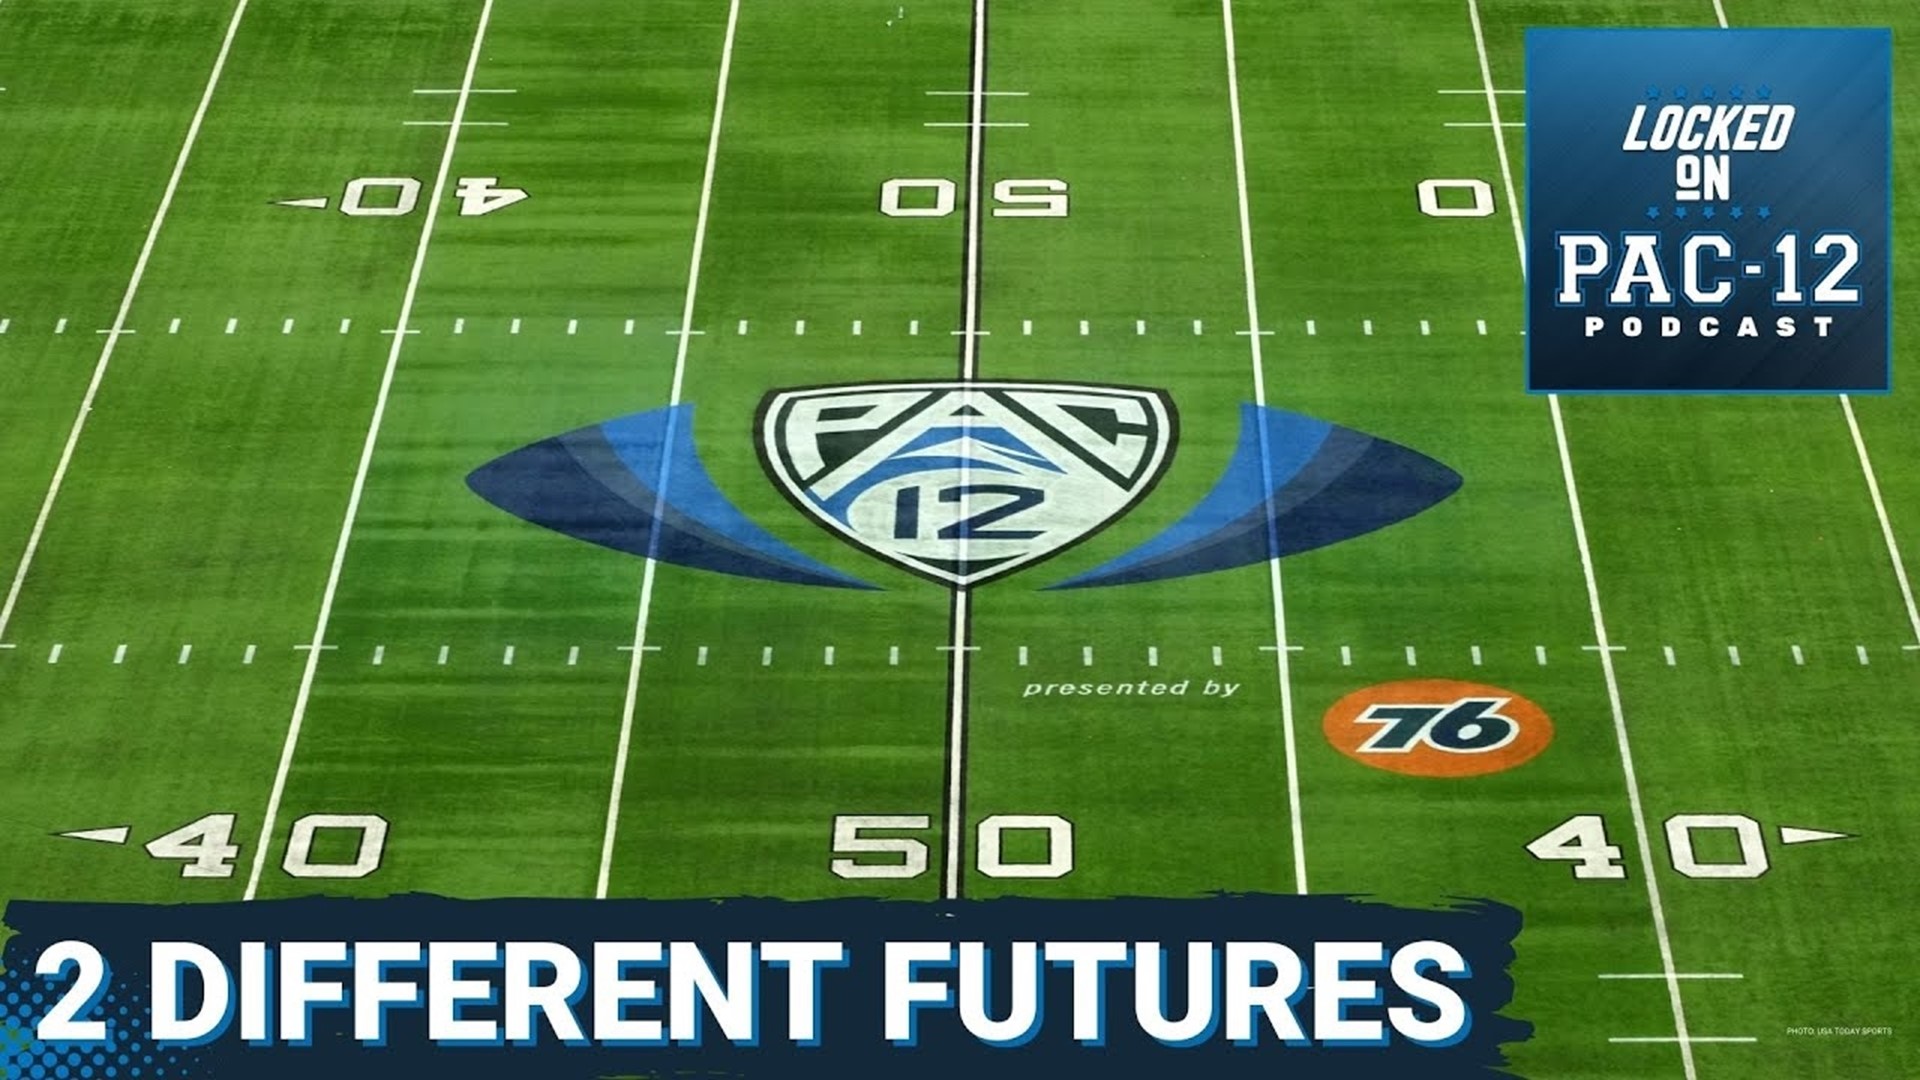 Paul Finebaum predicted the demise of the Pac-12 by 2026. The truth is that the league has a viable path forward.